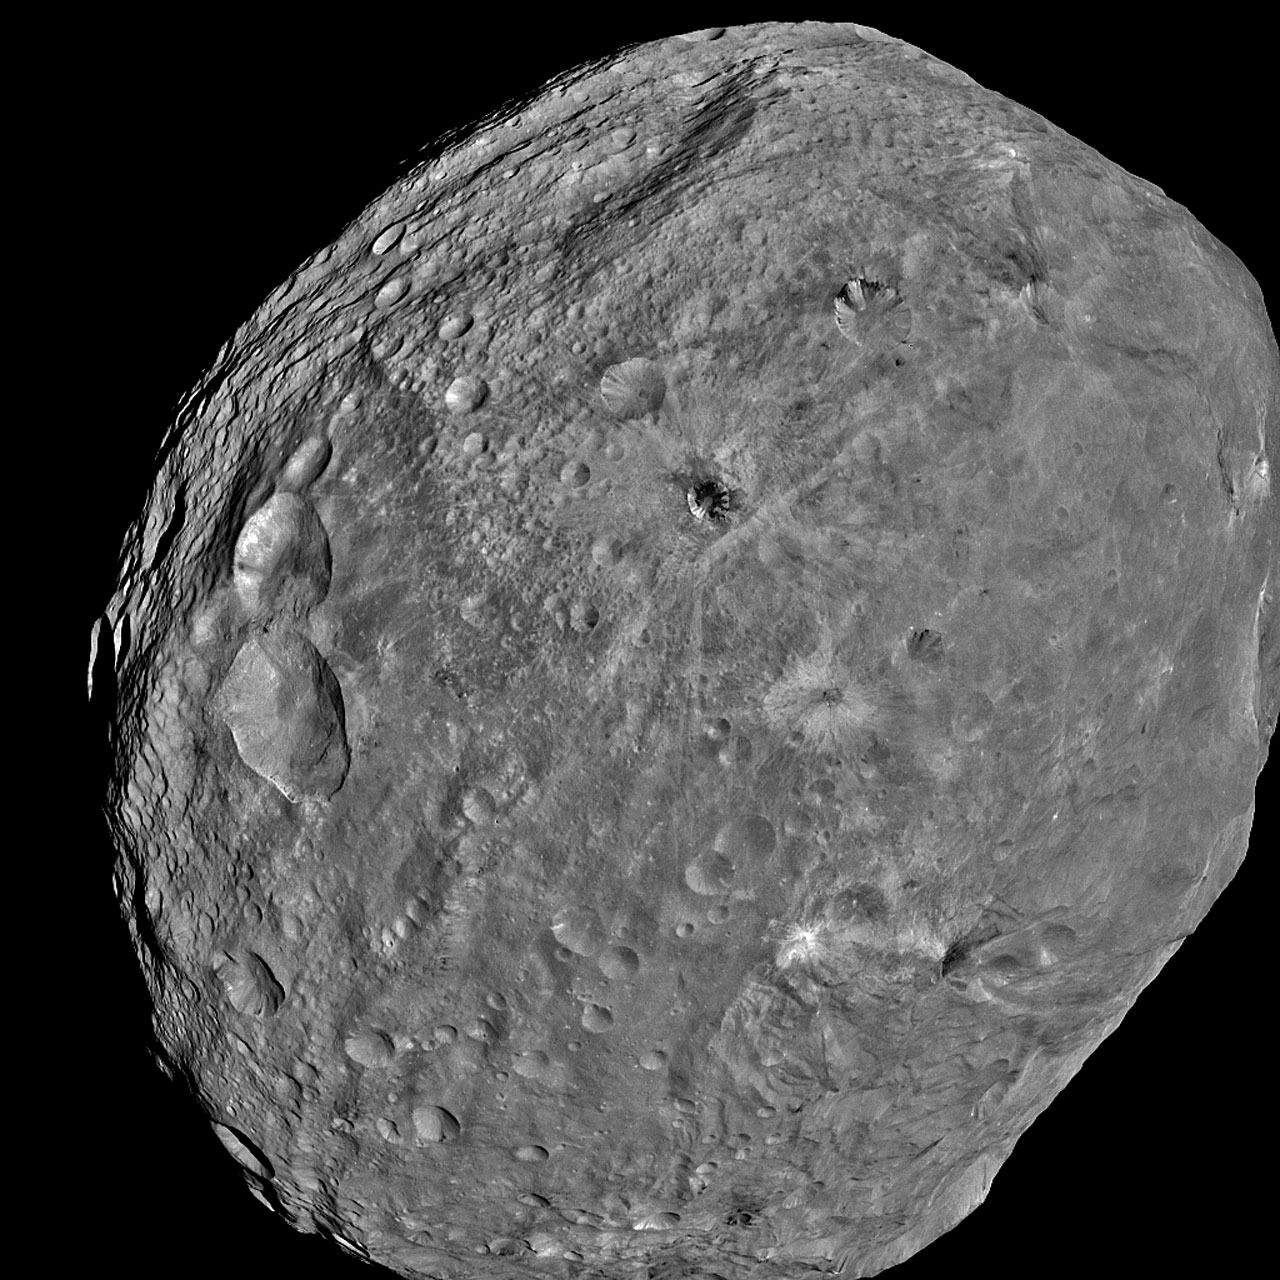 Vesta as seen with the Dawn spacecraft